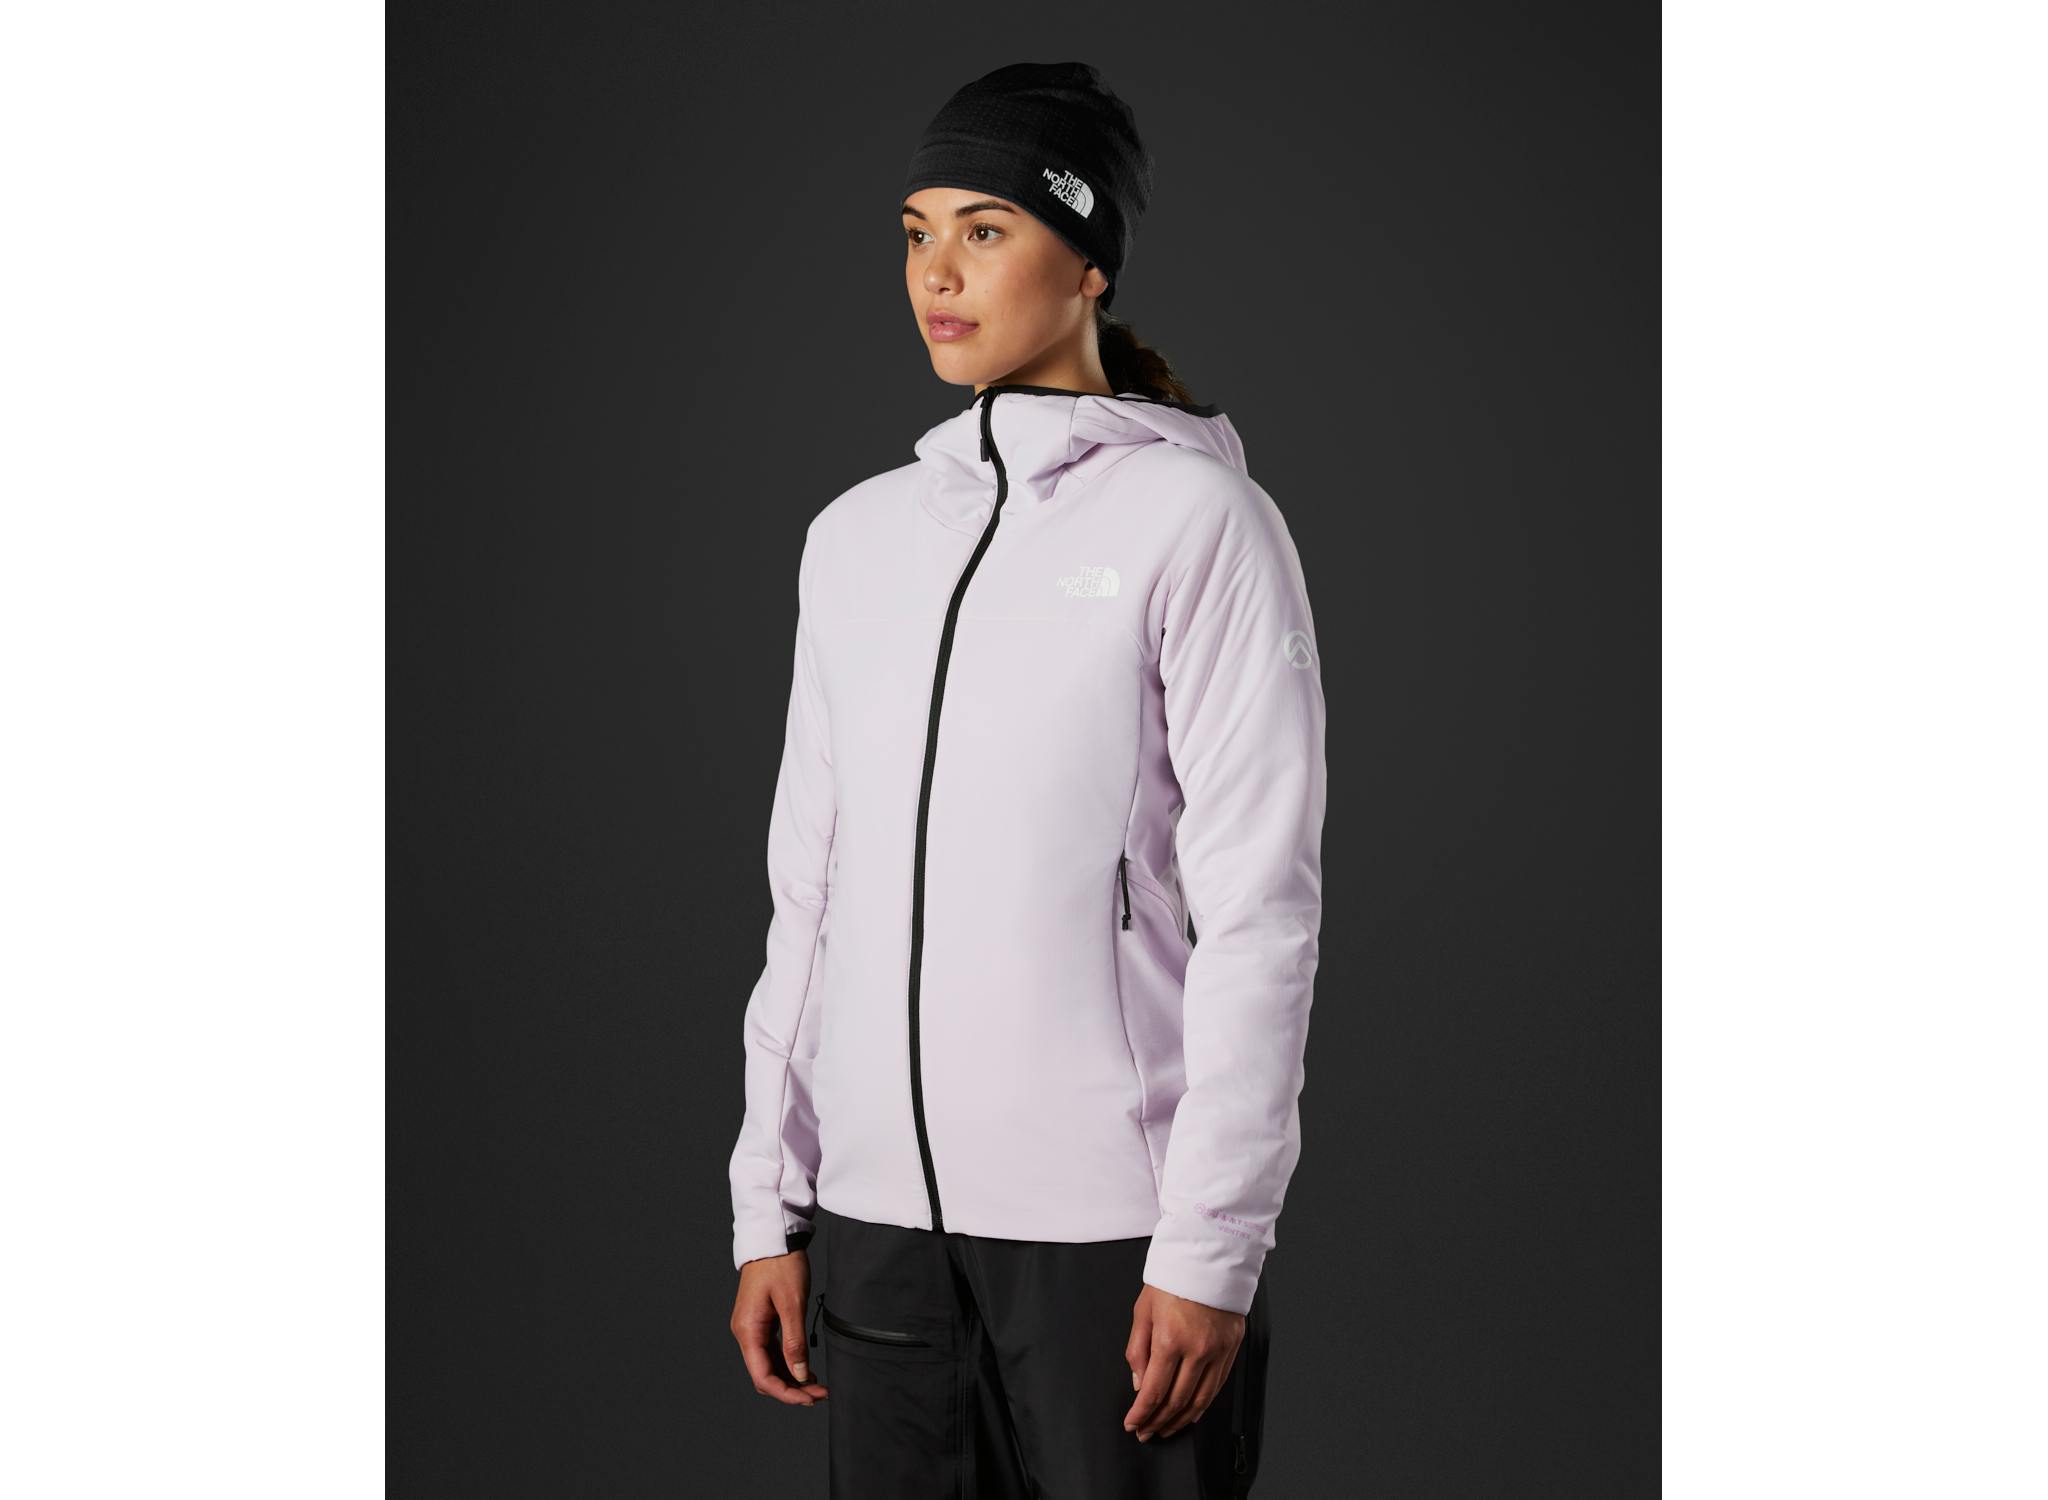 The North Face Women's Summit Casaval Hybrid Hoodie